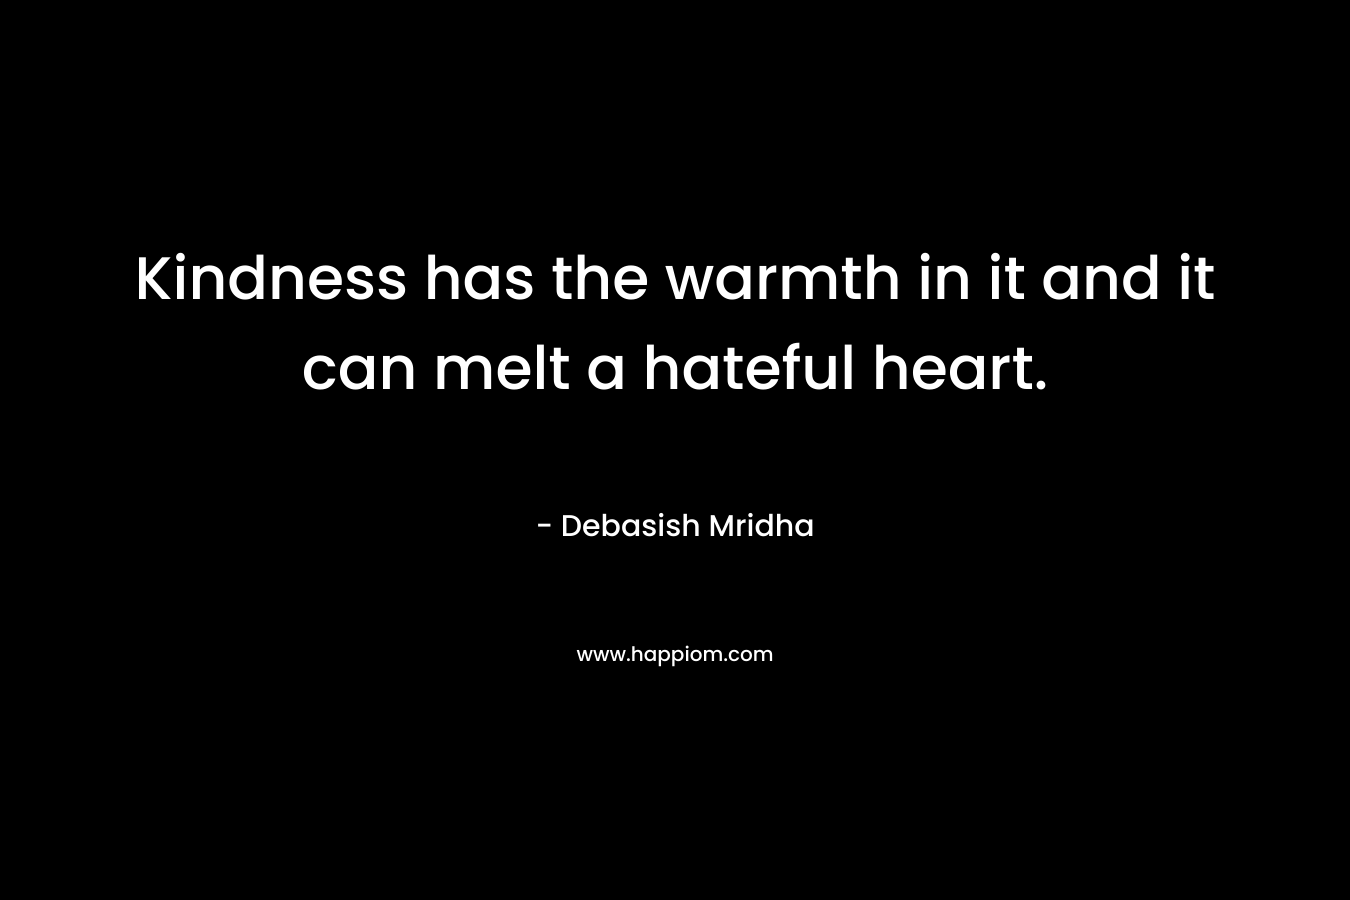 Kindness has the warmth in it and it can melt a hateful heart.